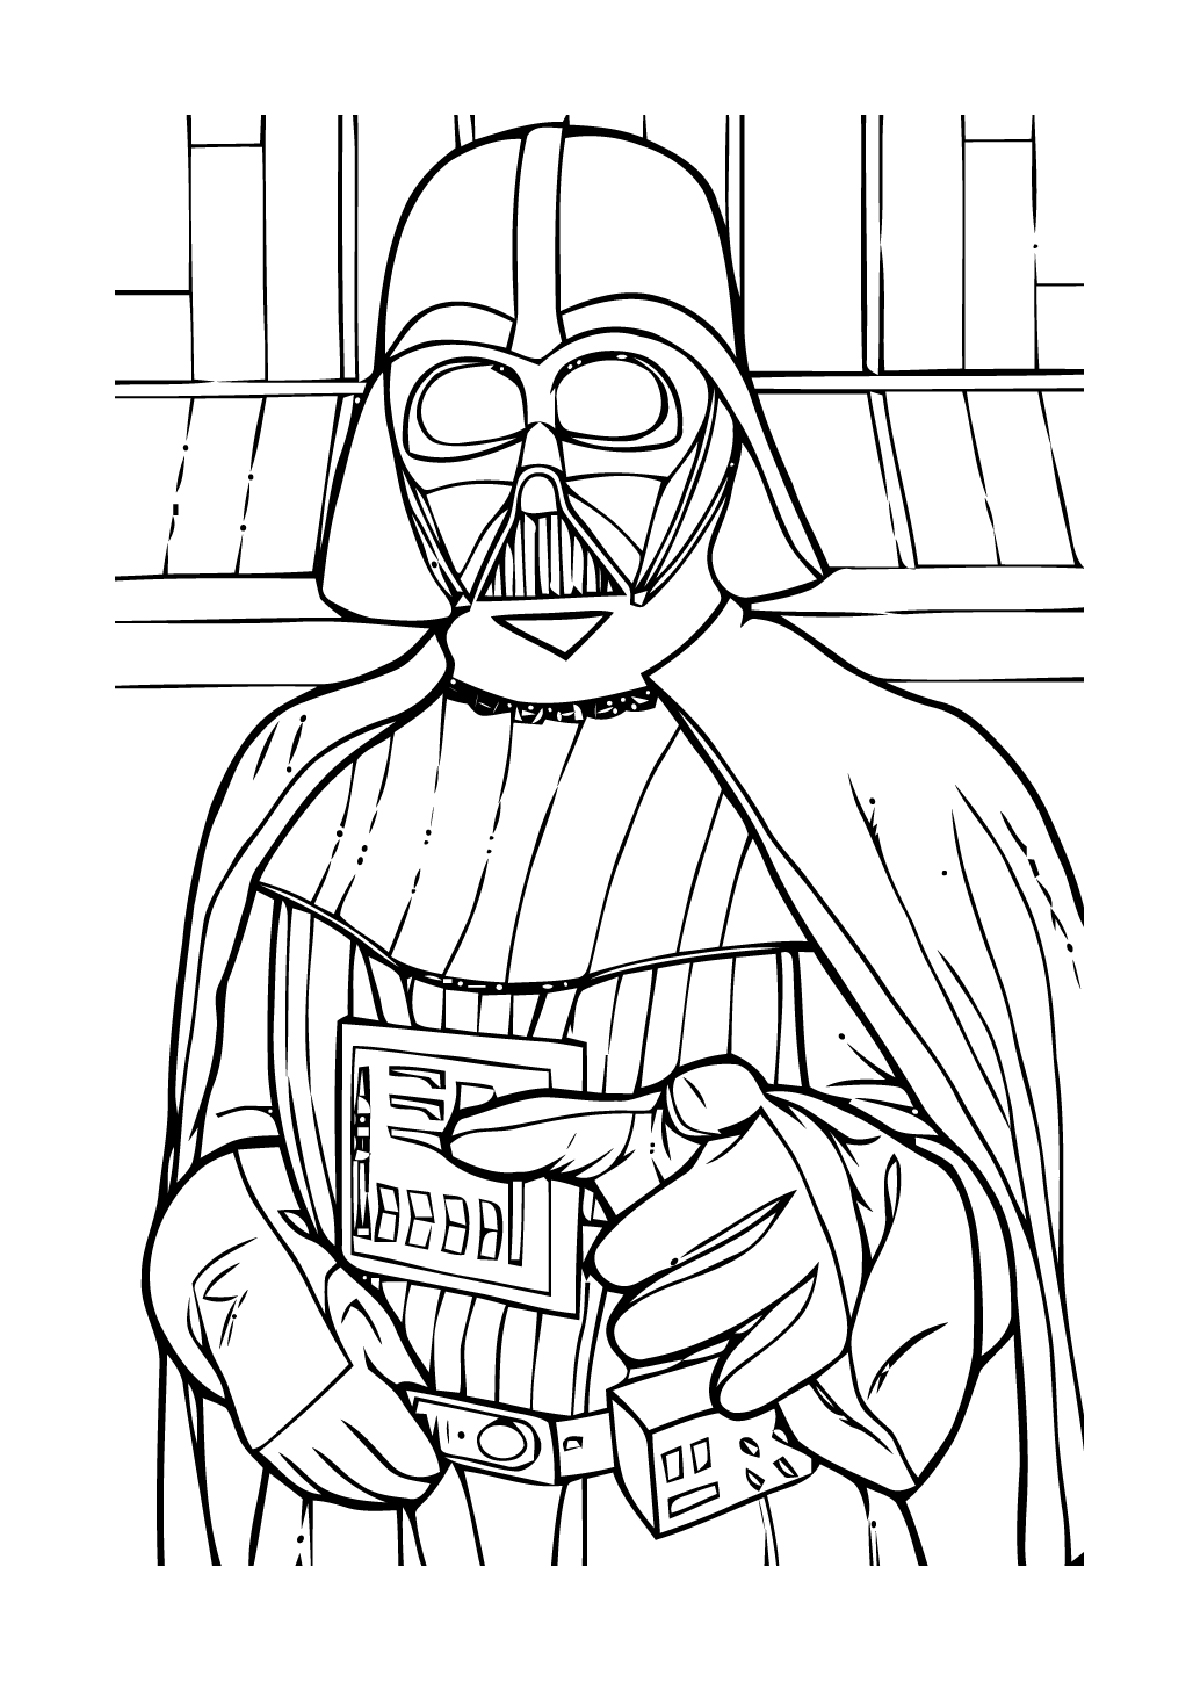 Printable Coloring Pages Star Wars - Customize and Print